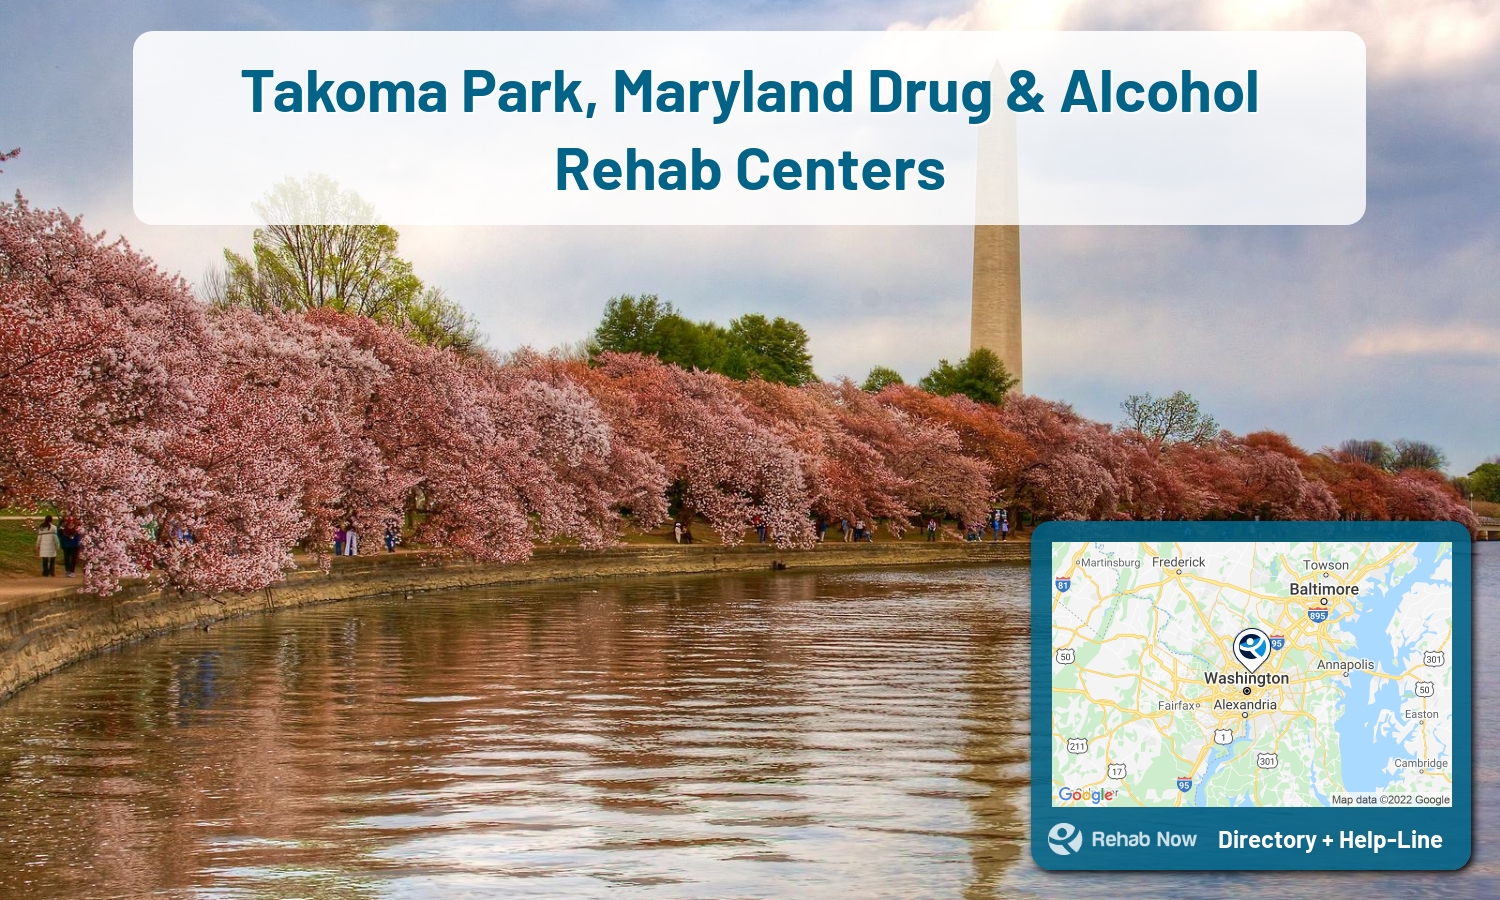 View options, availability, treatment methods, and more, for drug rehab and alcohol treatment in Takoma Park, Maryland